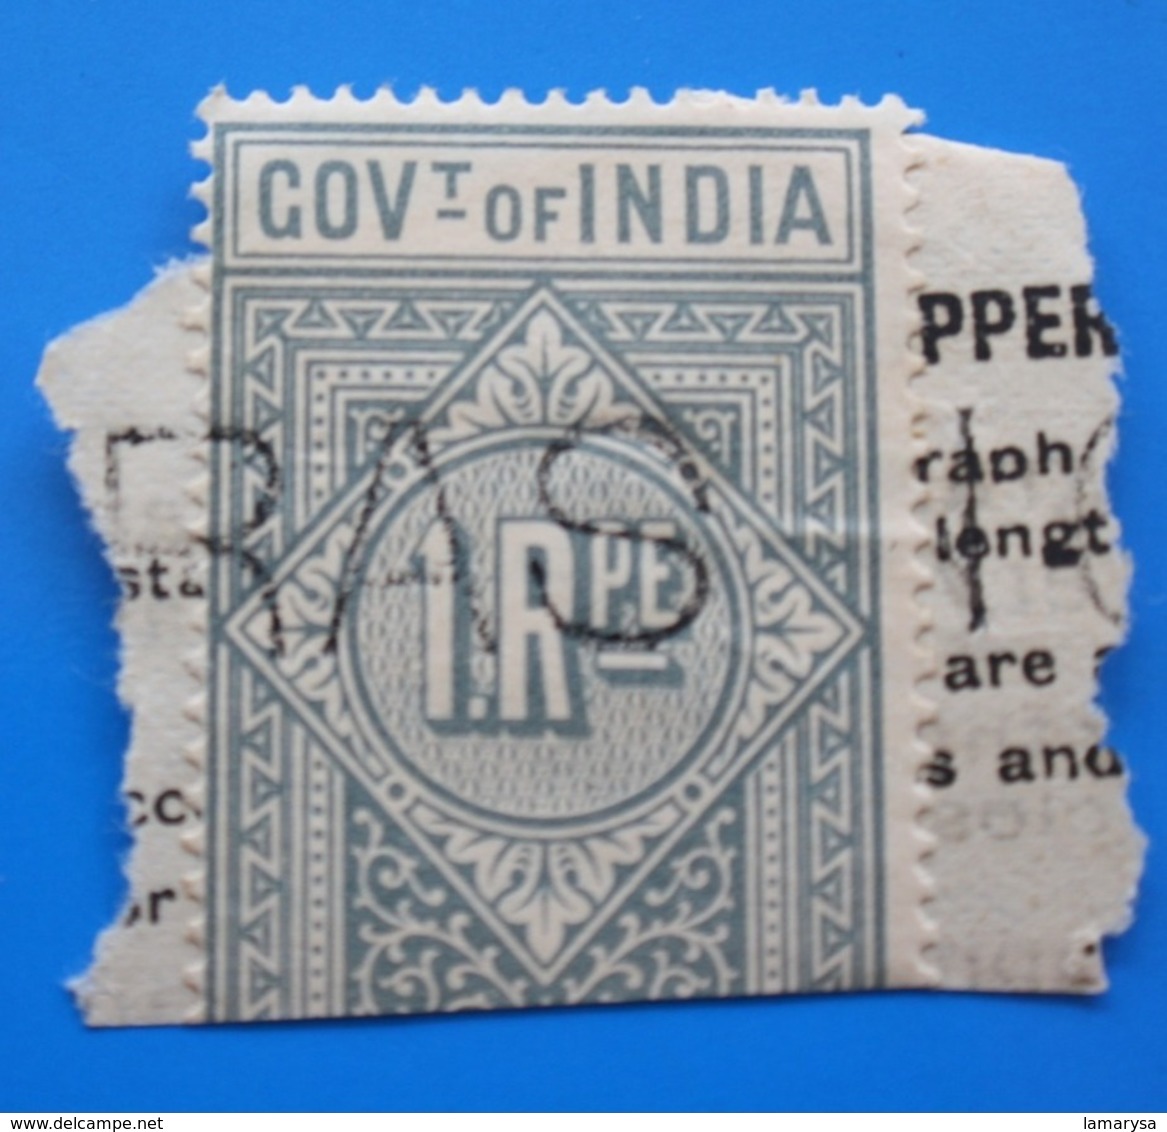 GOVERNMENT OF INDIA Tax Stamp Service Ex English Colony Cancellation Stamp Of The Consul-Timbre Fiscal Consulat Service - 1854 Britse Indische Compagnie